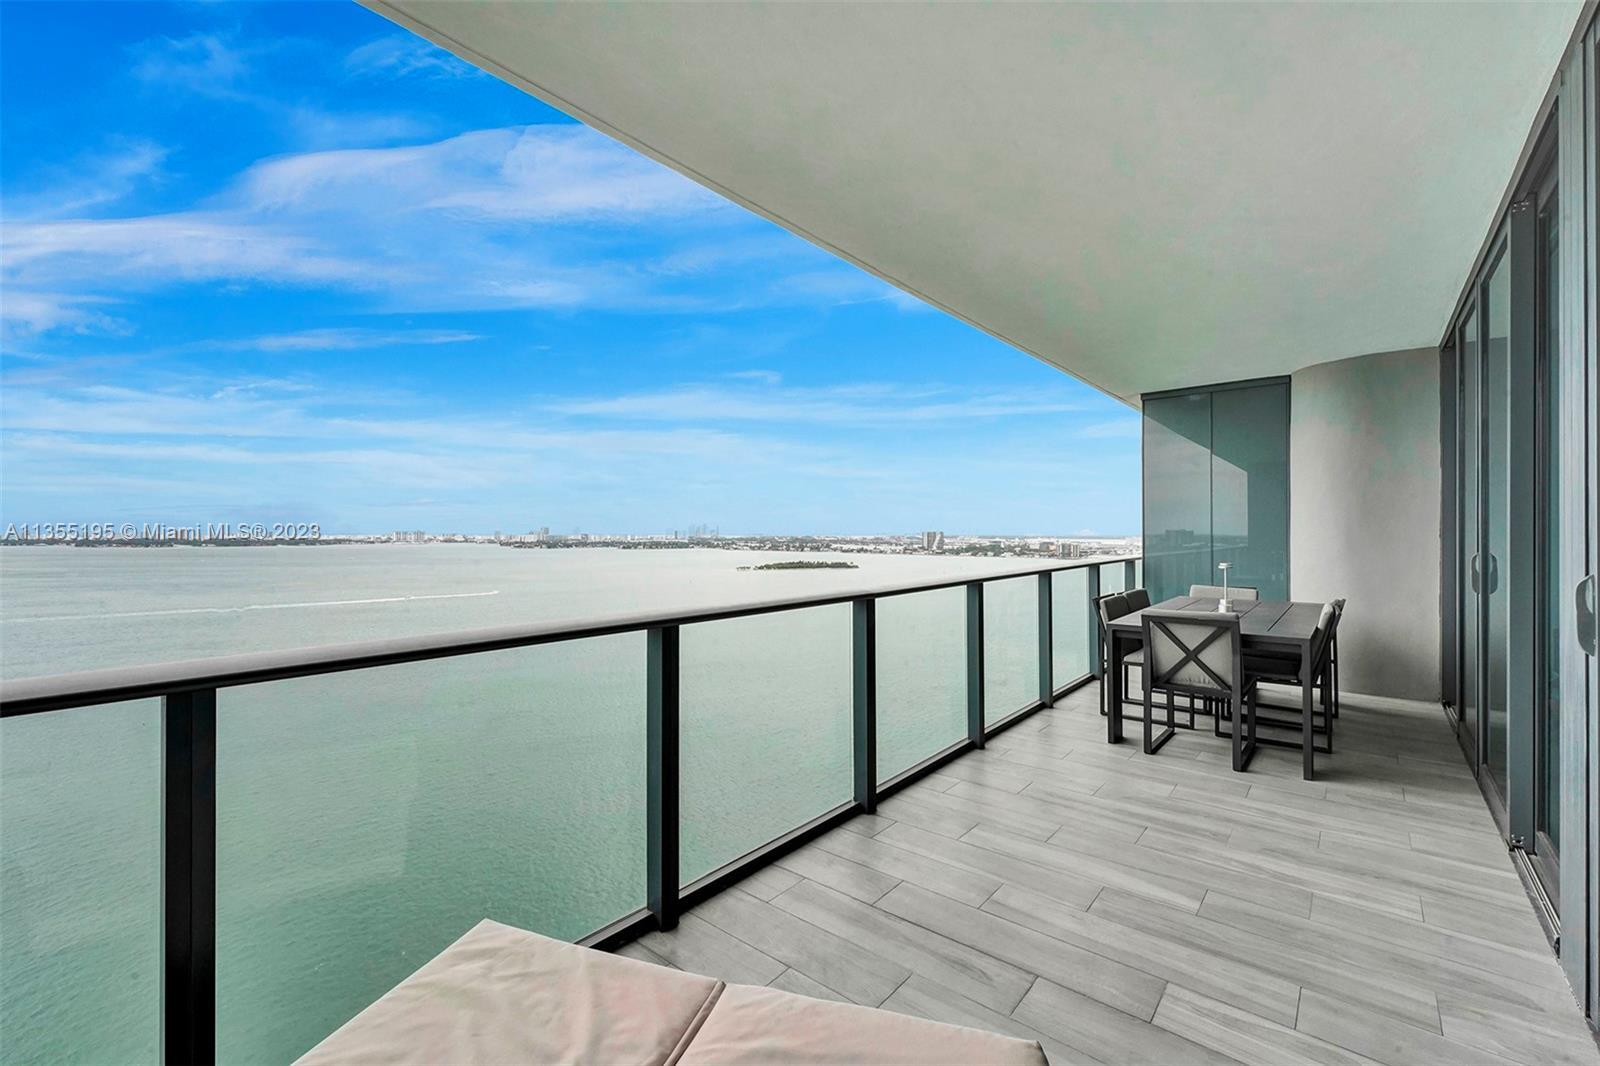 Enjoy one of Miami's best bay views, One Paraiso sits directly on the seawall facing Biscayne Bay. T